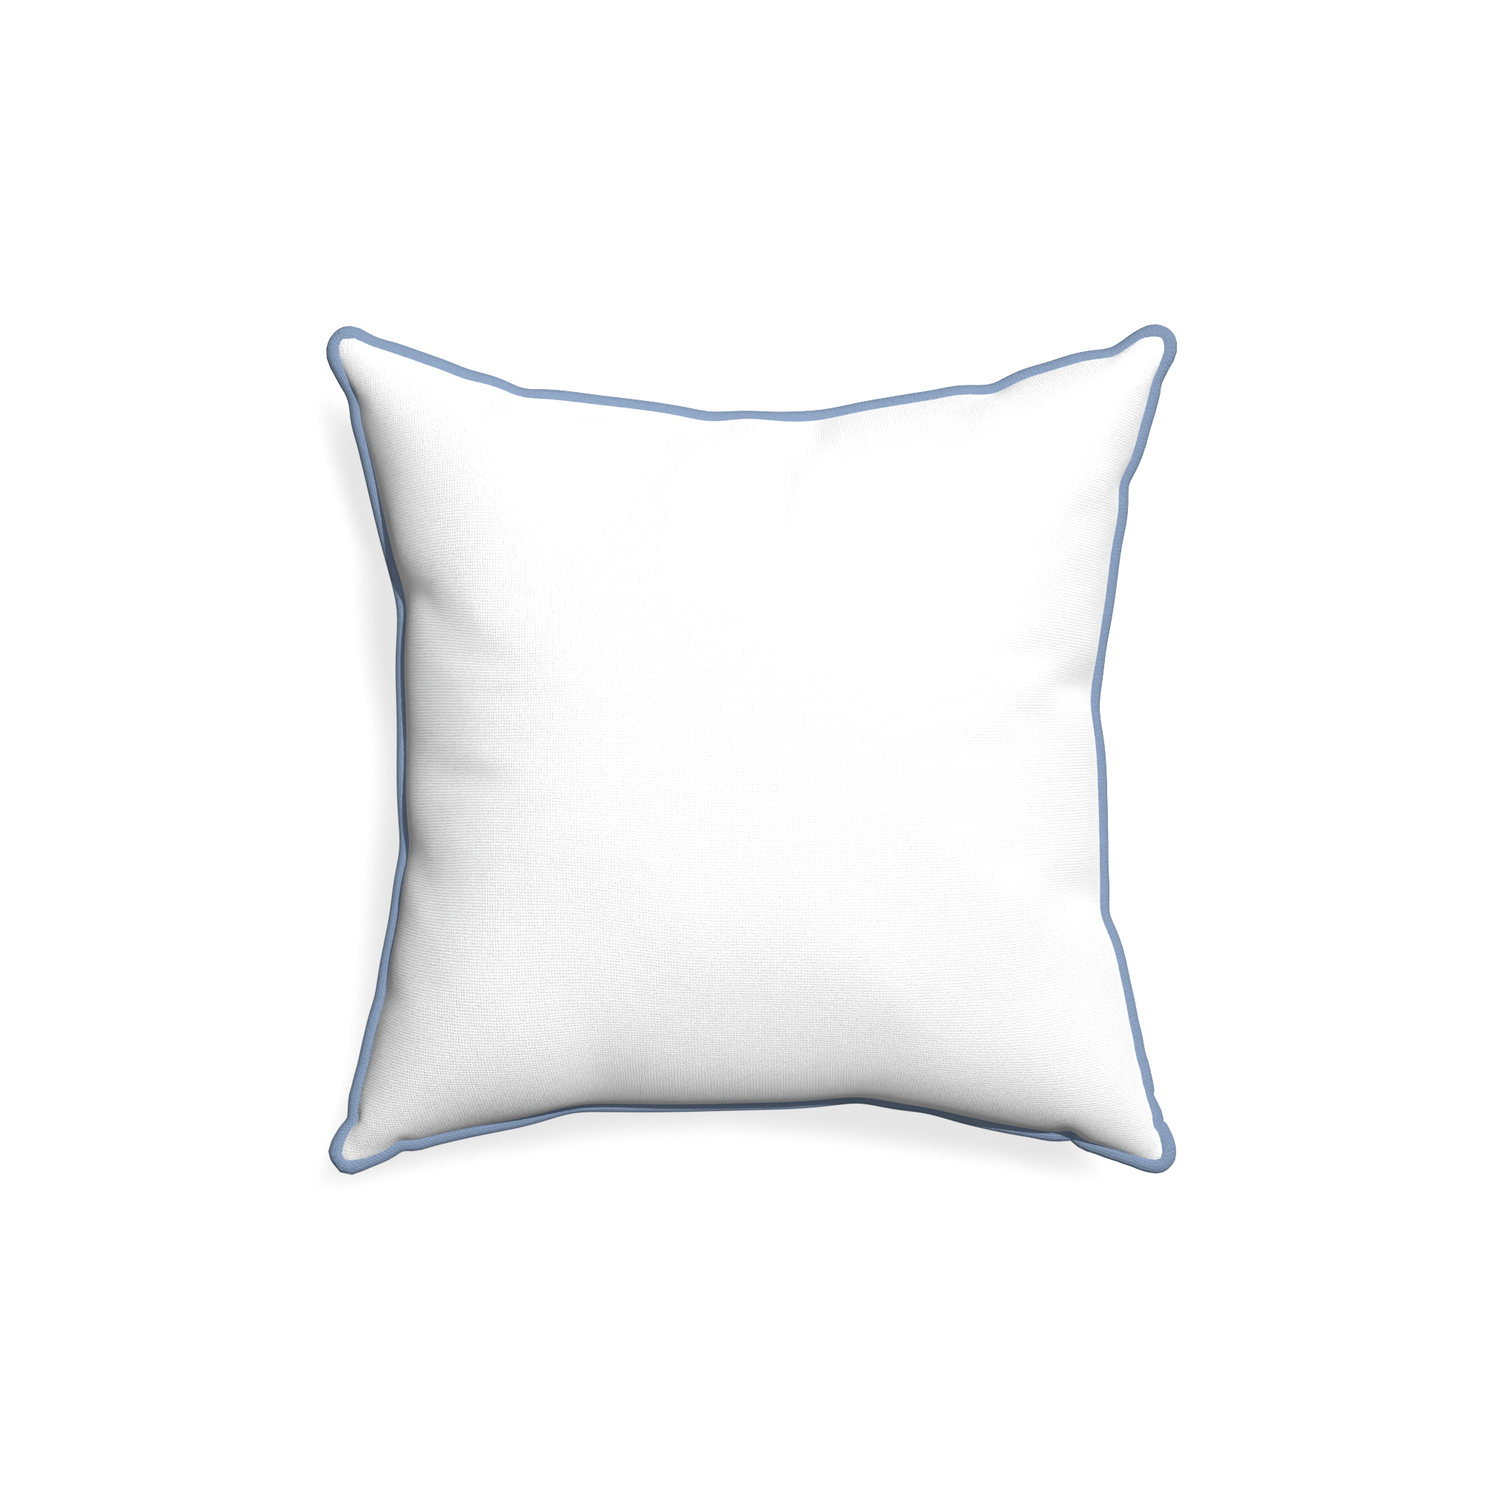 18-square snow custom pillow with sky piping on white background